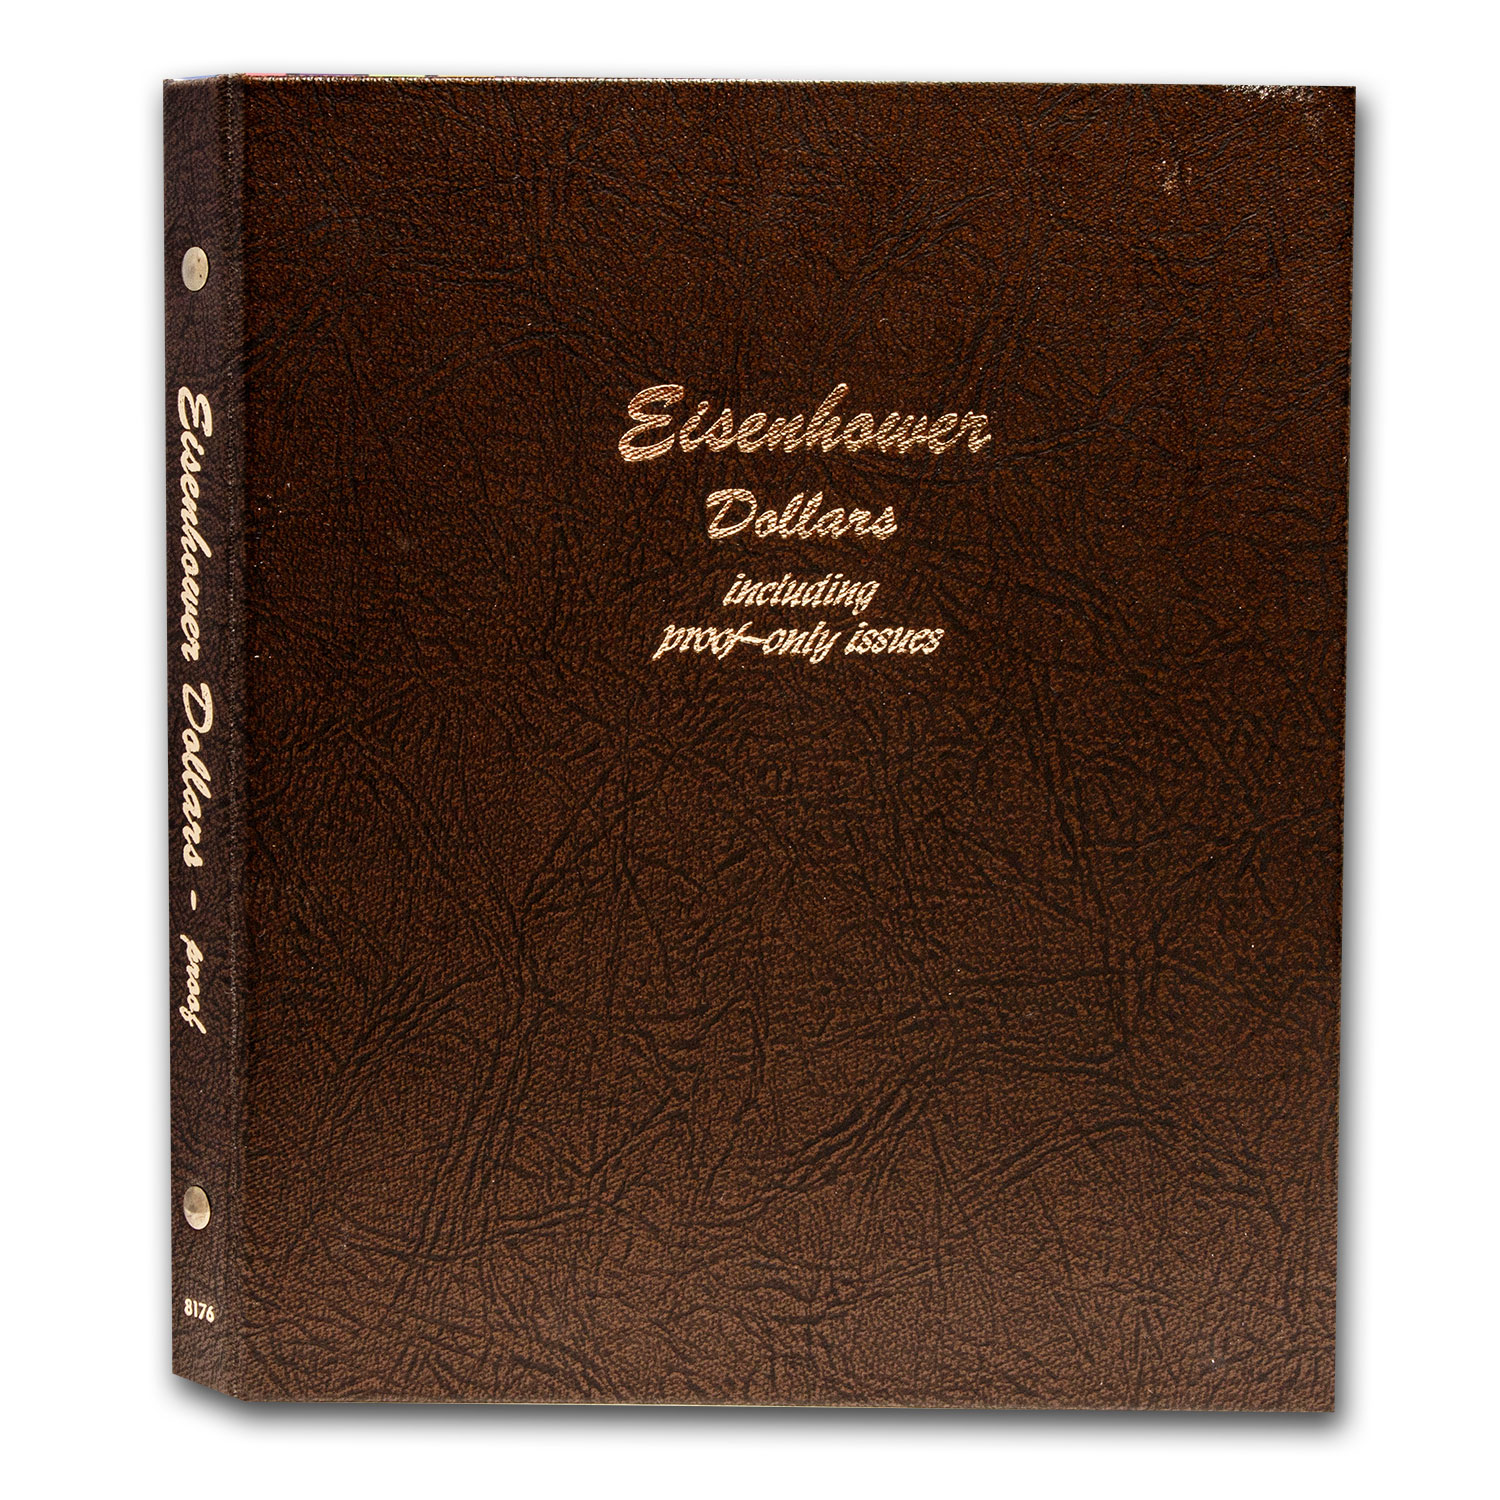 Without Proofs Dansco Coin Album # 7176 For Eisenhower Dollars From 1971-1978, 